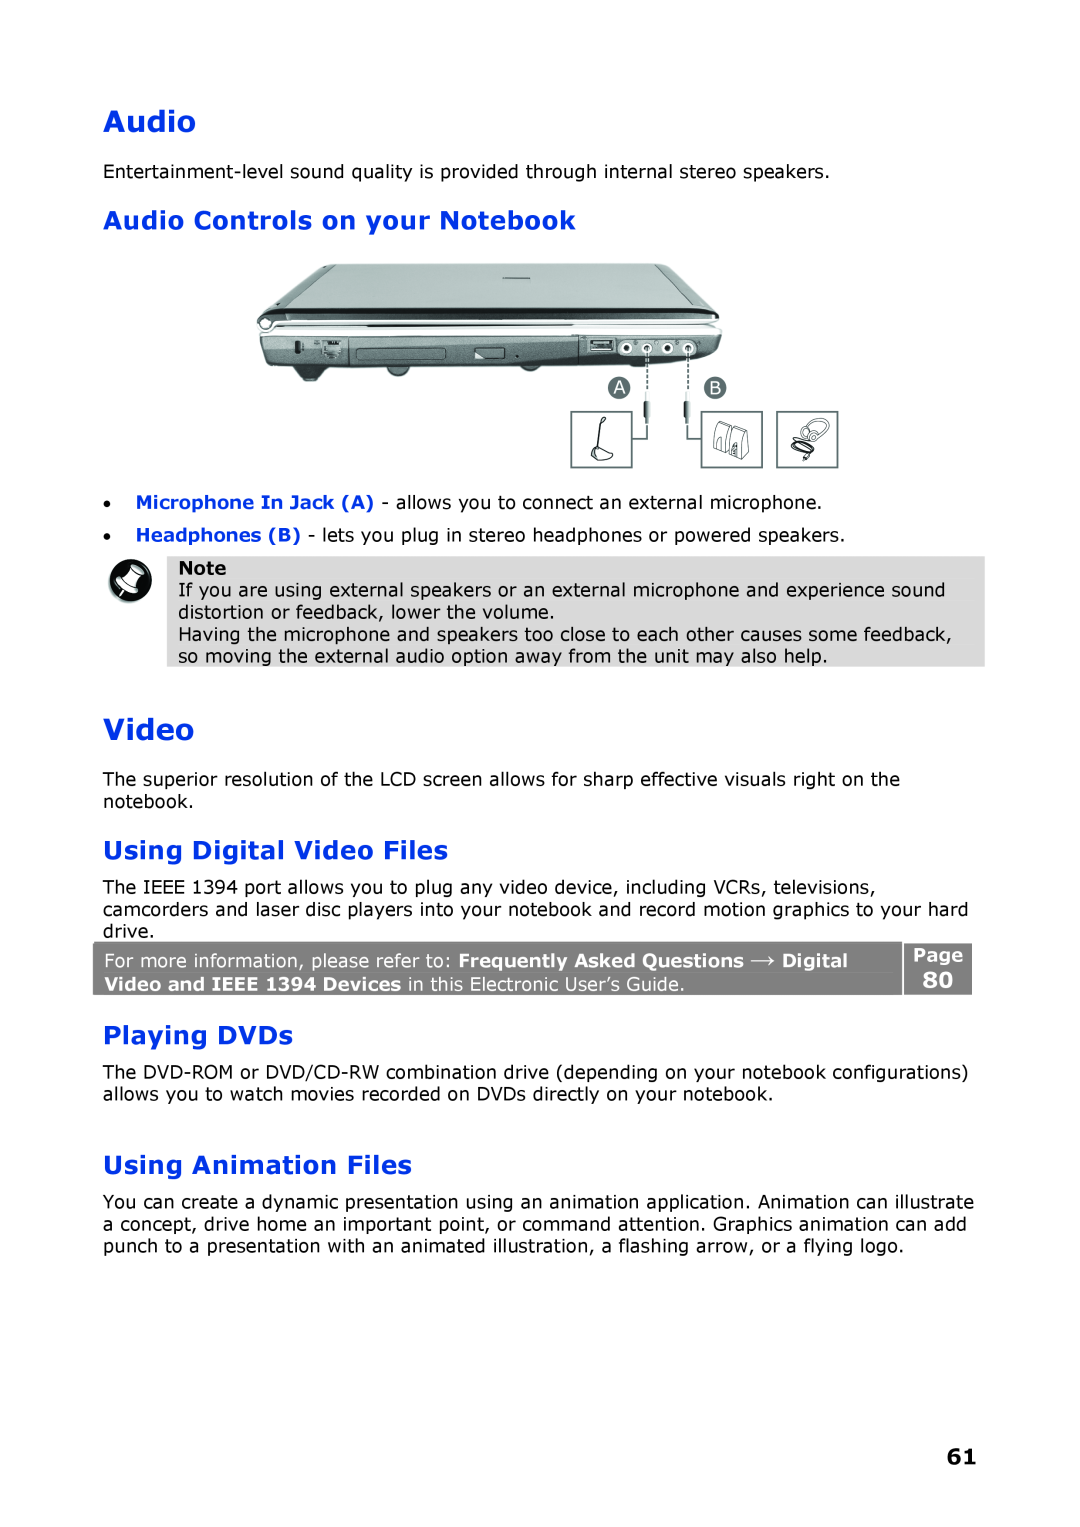 NEC P8510 Audio Controls on your Notebook, Using Digital Video Files, Playing DVDs, Using Animation Files, Page 